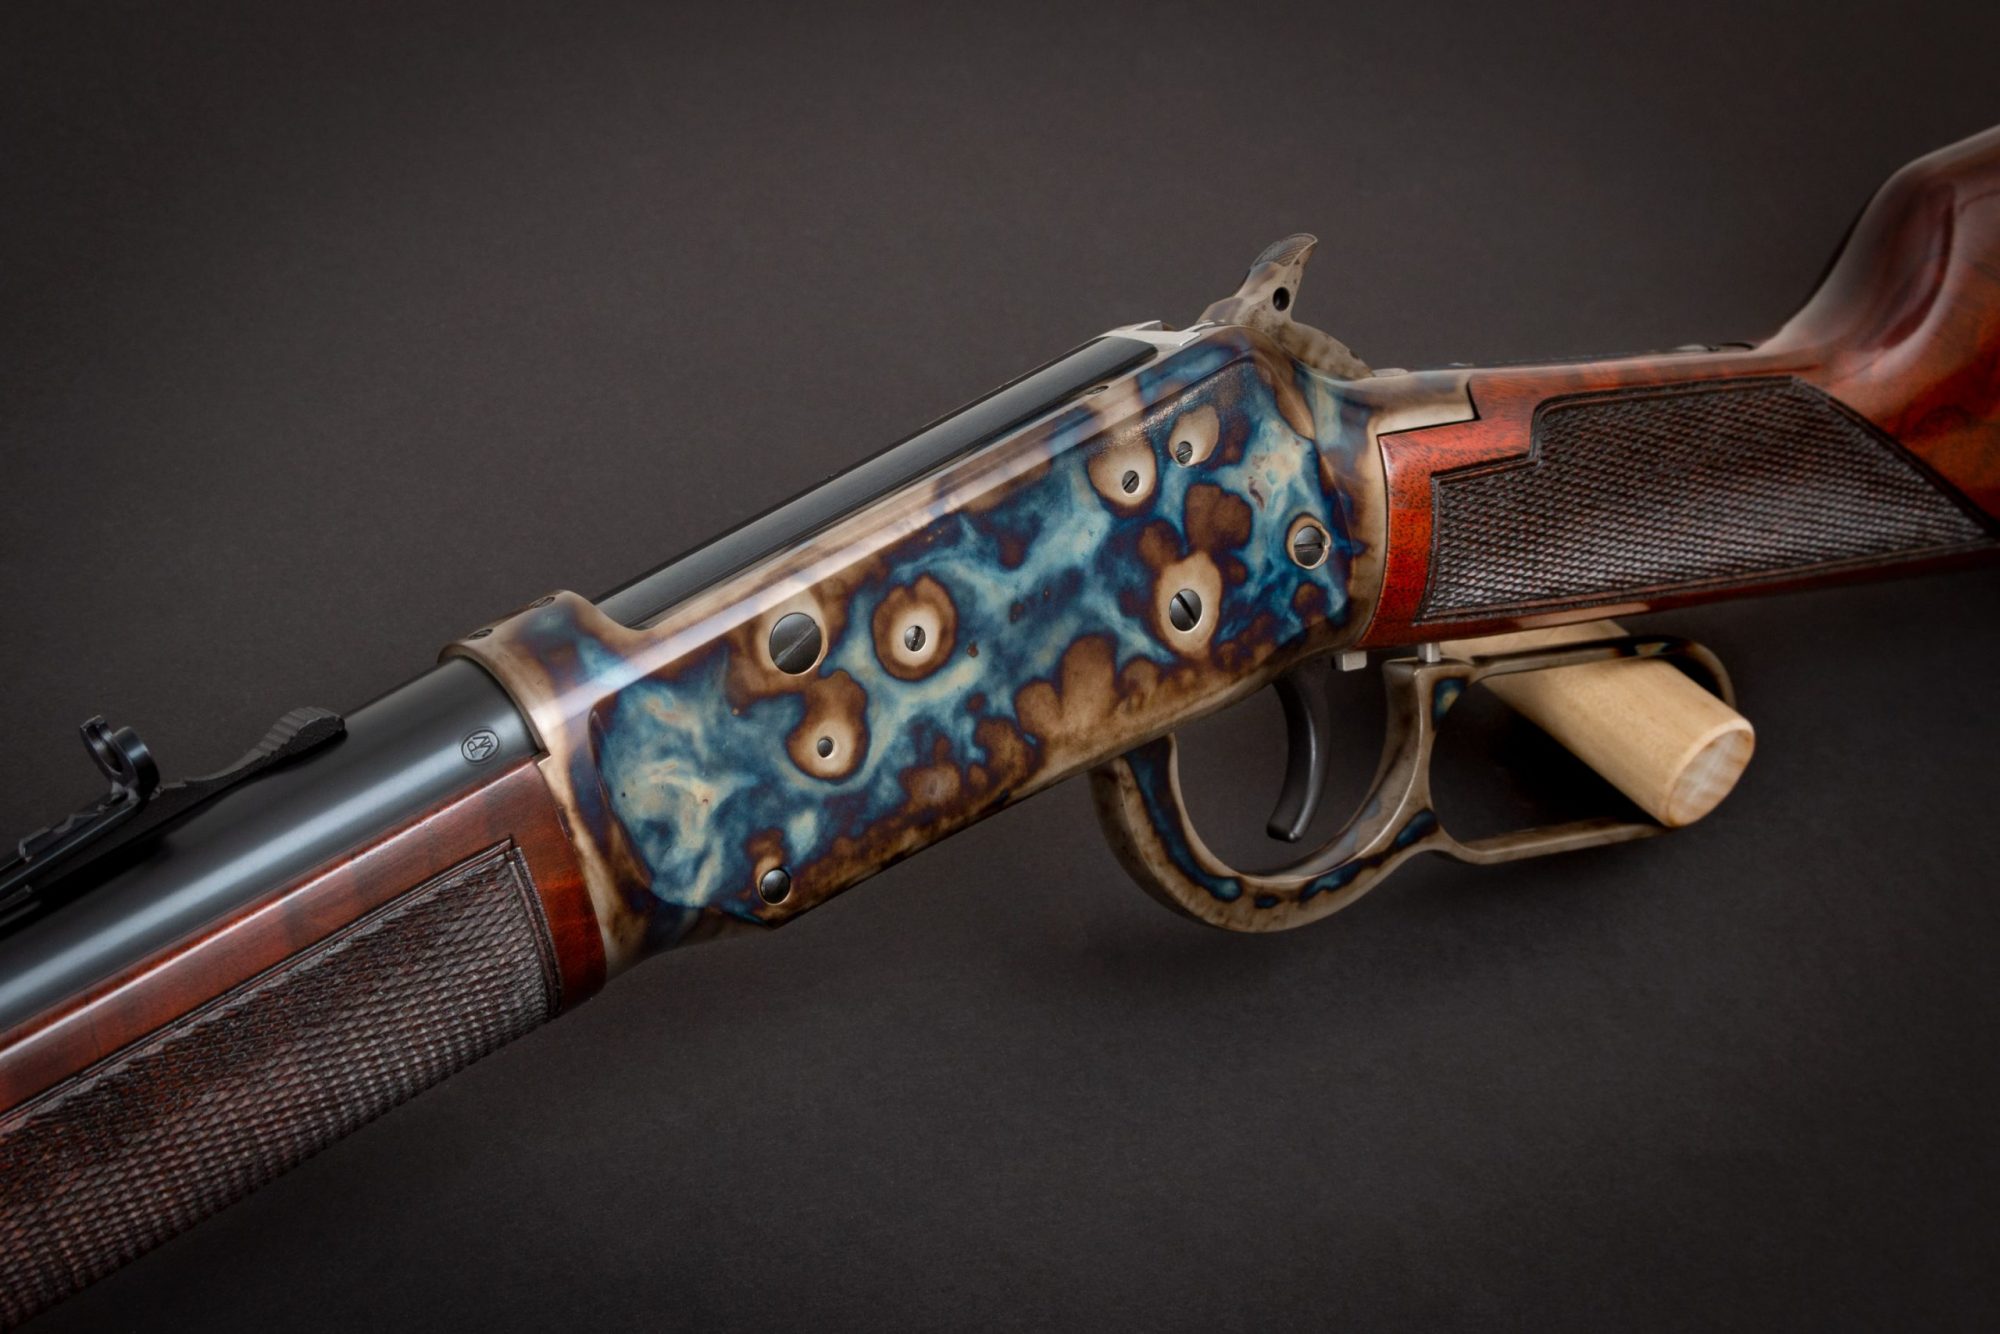 Photo of a refinished Winchester Model 1894 - The Turnbull Winchester 1894 features classic era metal finishes including bone charcoal color case hardening and refinished wood in Winchester red